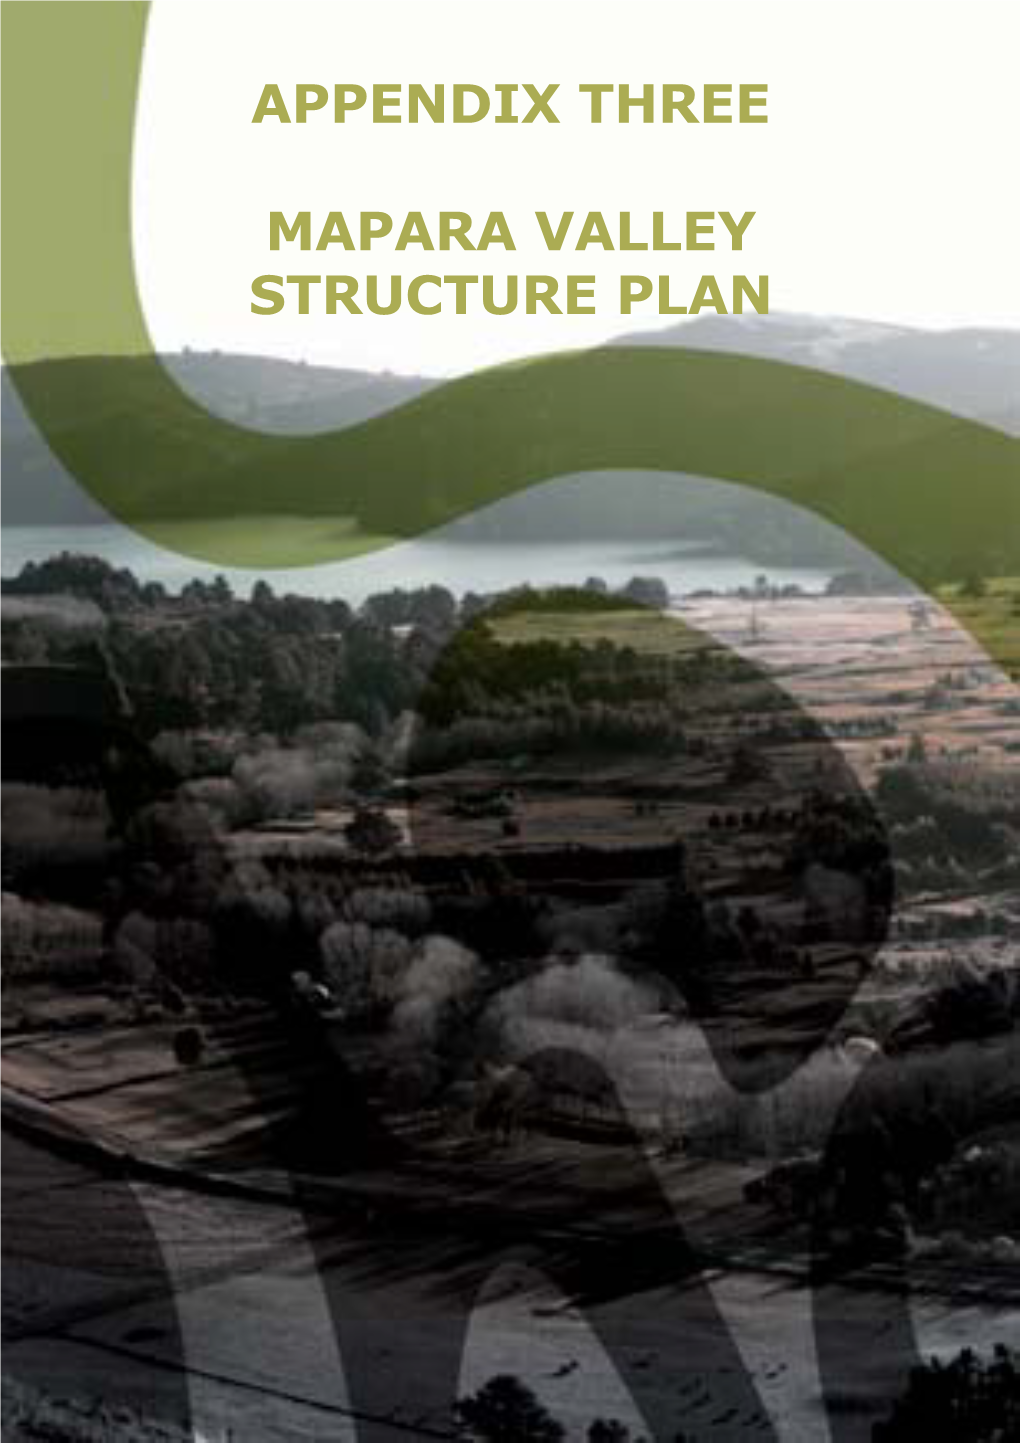 Appendix Three Section 1: Principles for the Mapara Valley Structure Plan